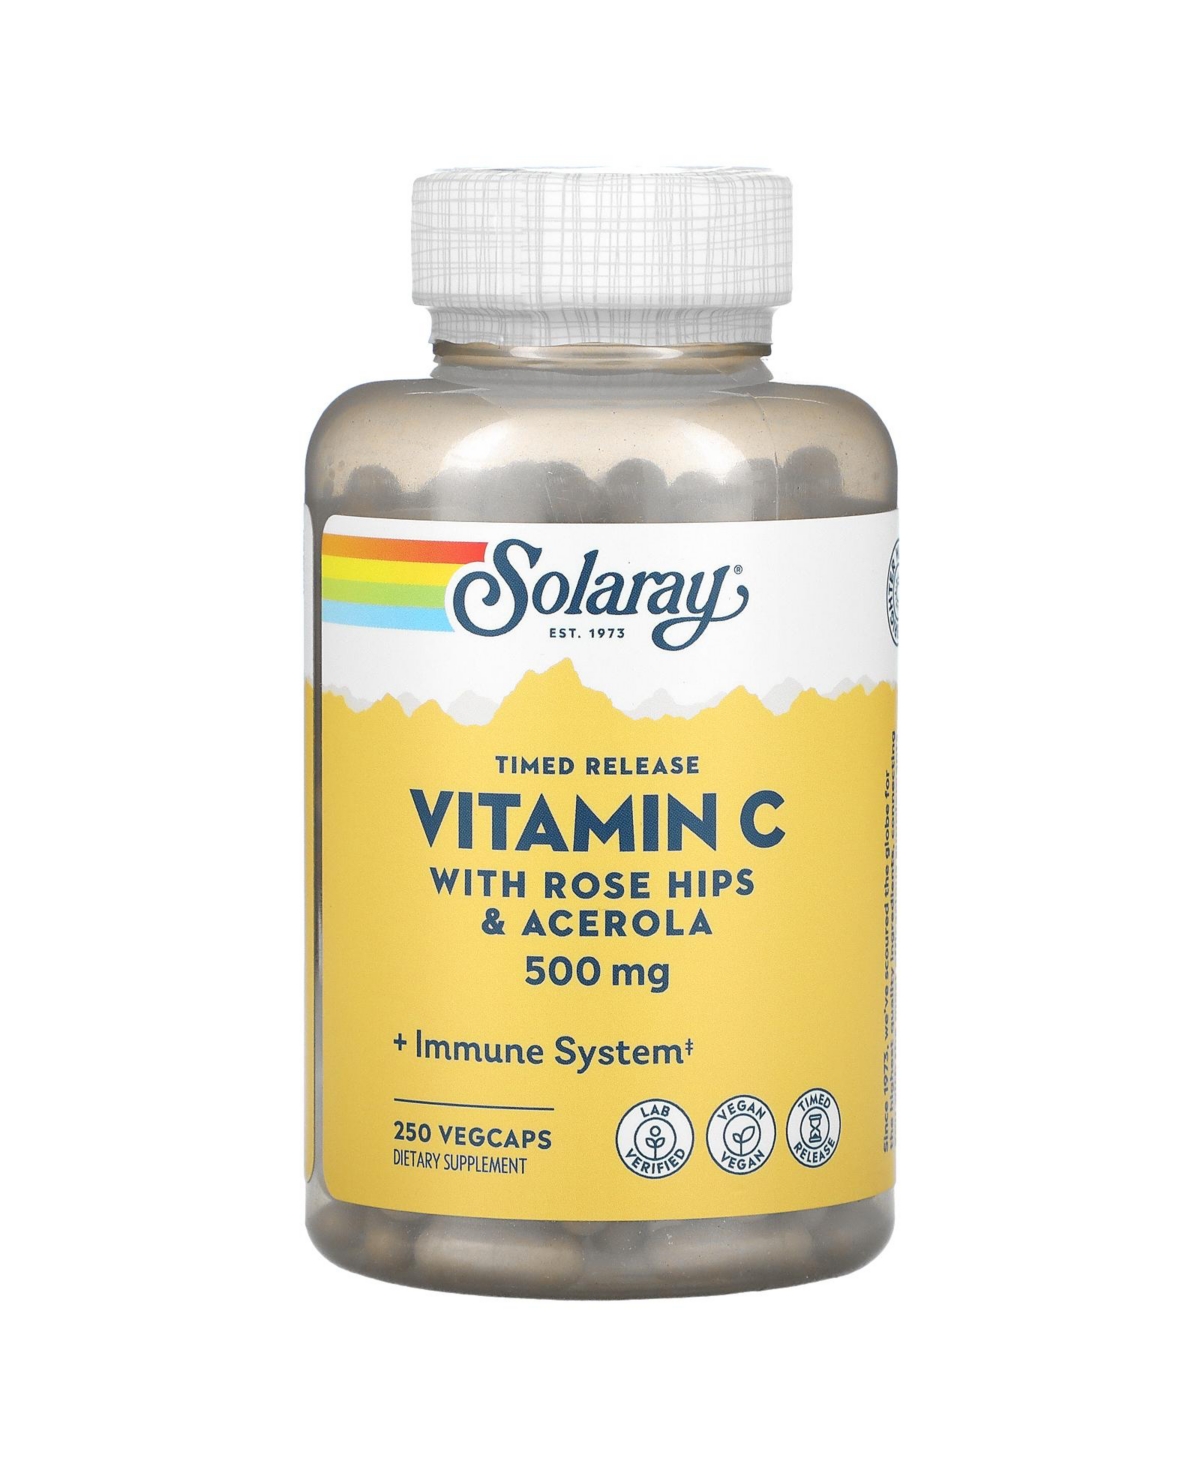 Timed Release Vitamin C with Rose Hips & Acerola 500 mg - 250 VegCaps - Assorted Pre-pack (See Table